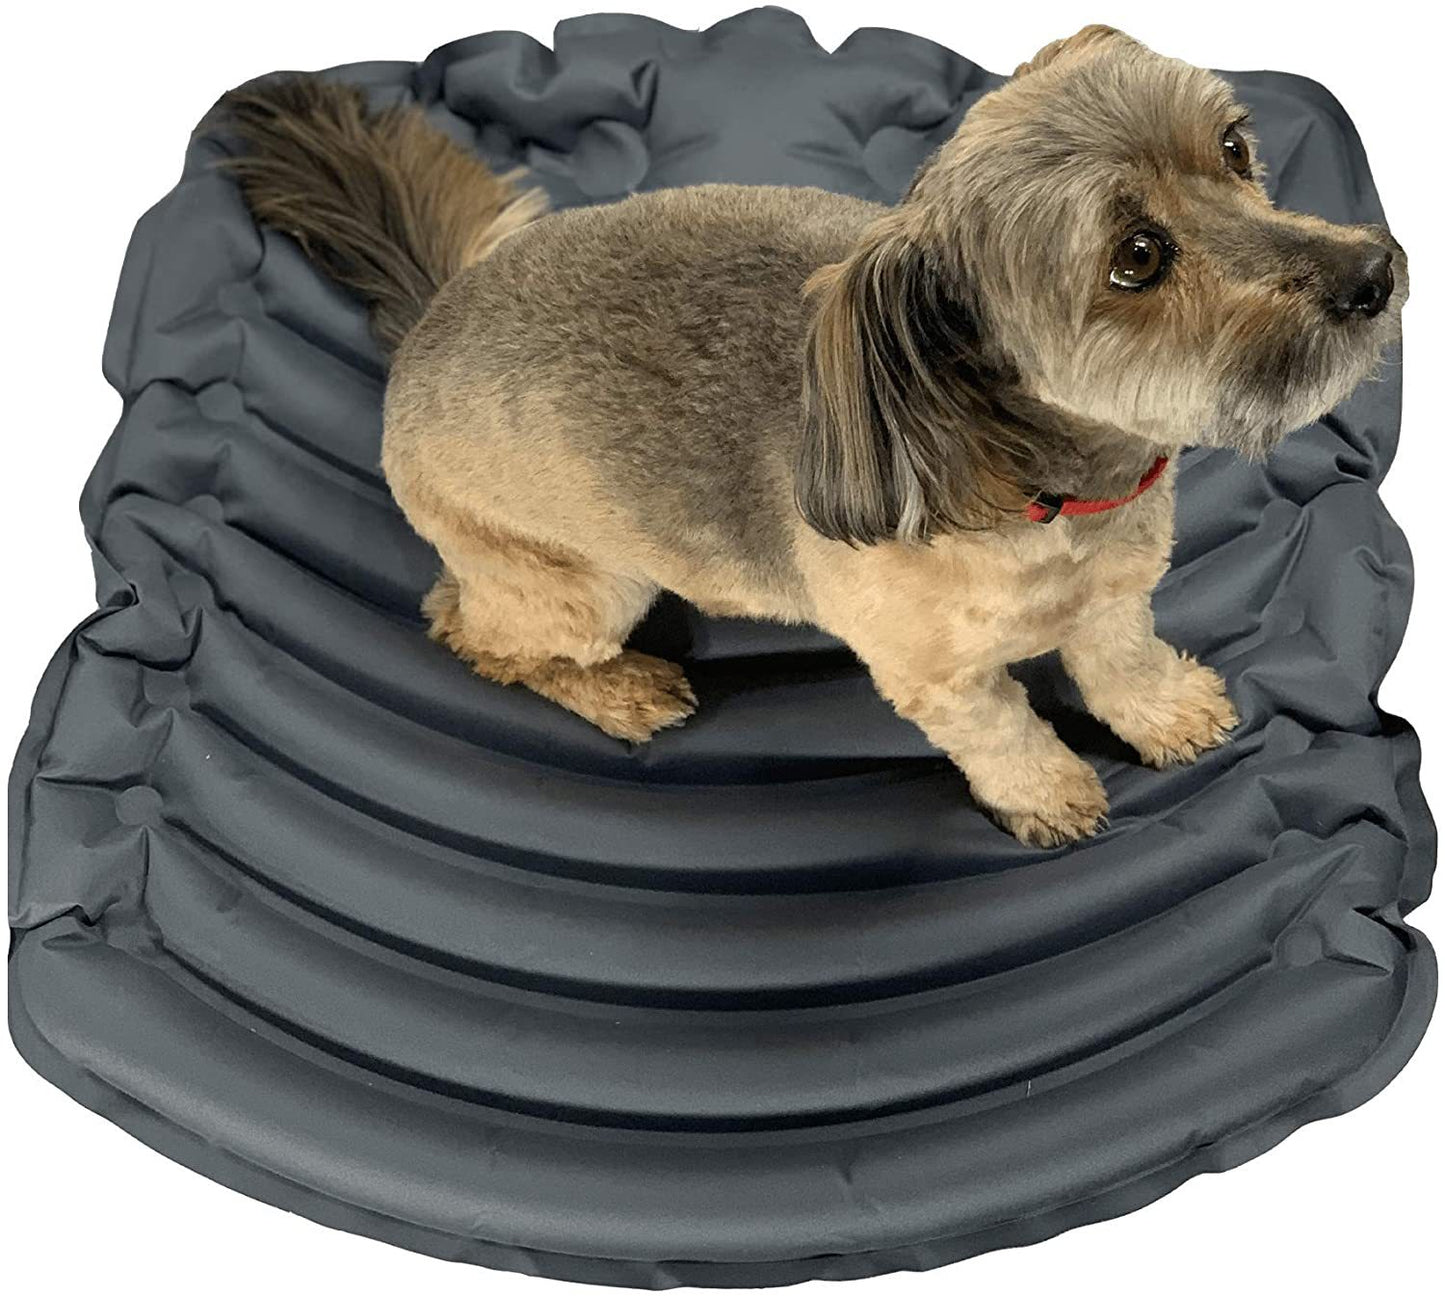 LONABR Inflatable Pet Beds, Easy to Carry and Store